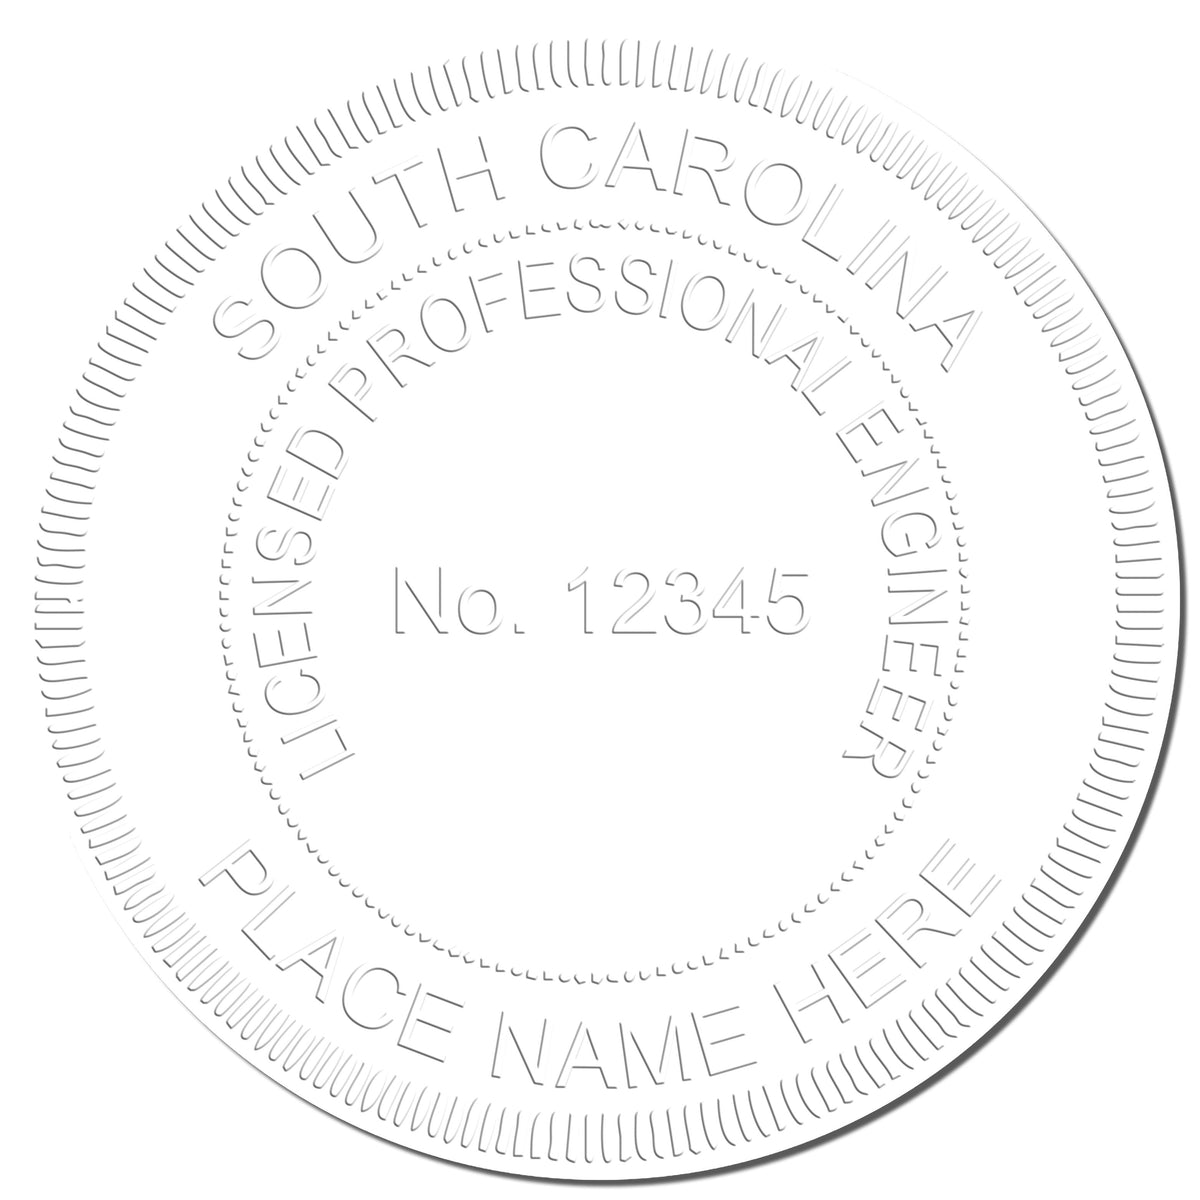 The Soft South Carolina Professional Engineer Seal stamp impression comes to life with a crisp, detailed photo on paper - showcasing true professional quality.